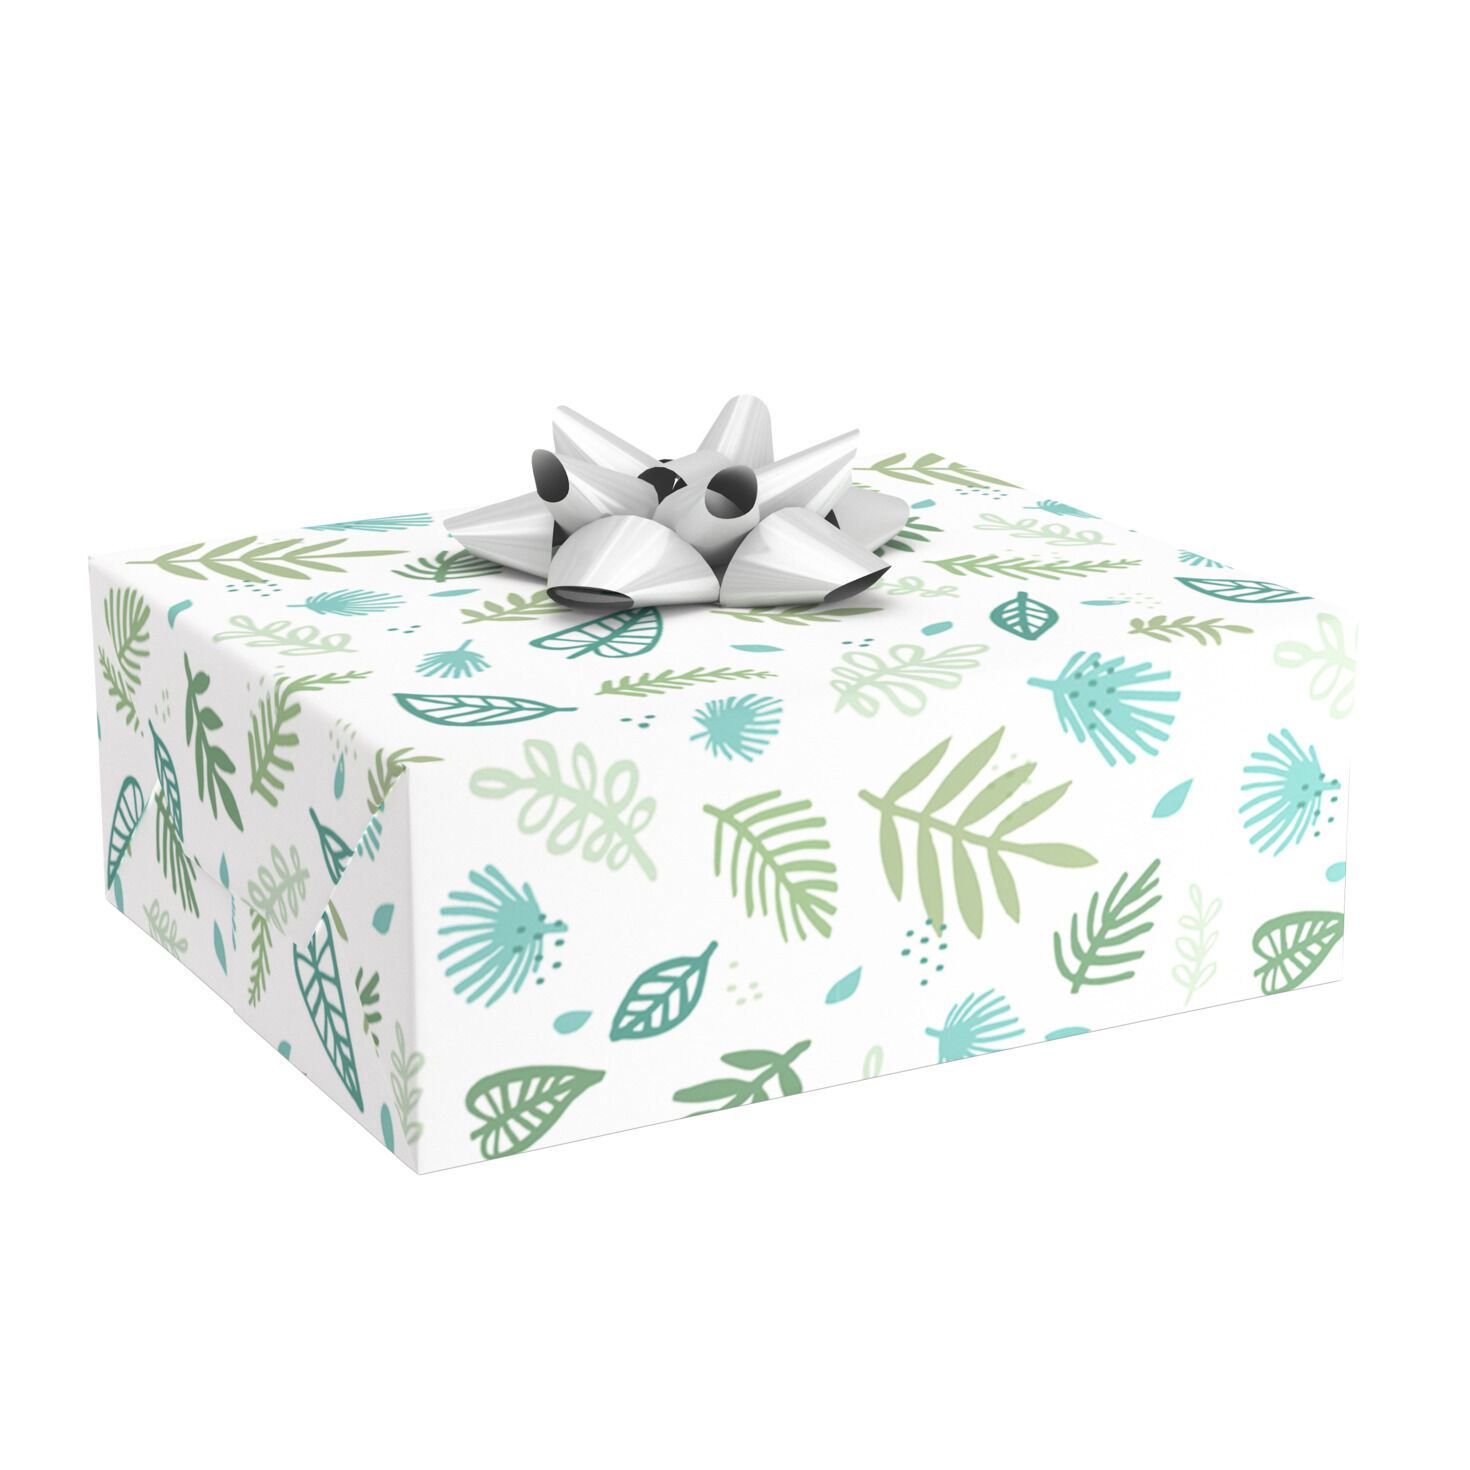 30 in x 5 Ft Roll w/ Ribbon Pack of 8 Gift Wrap Paper 